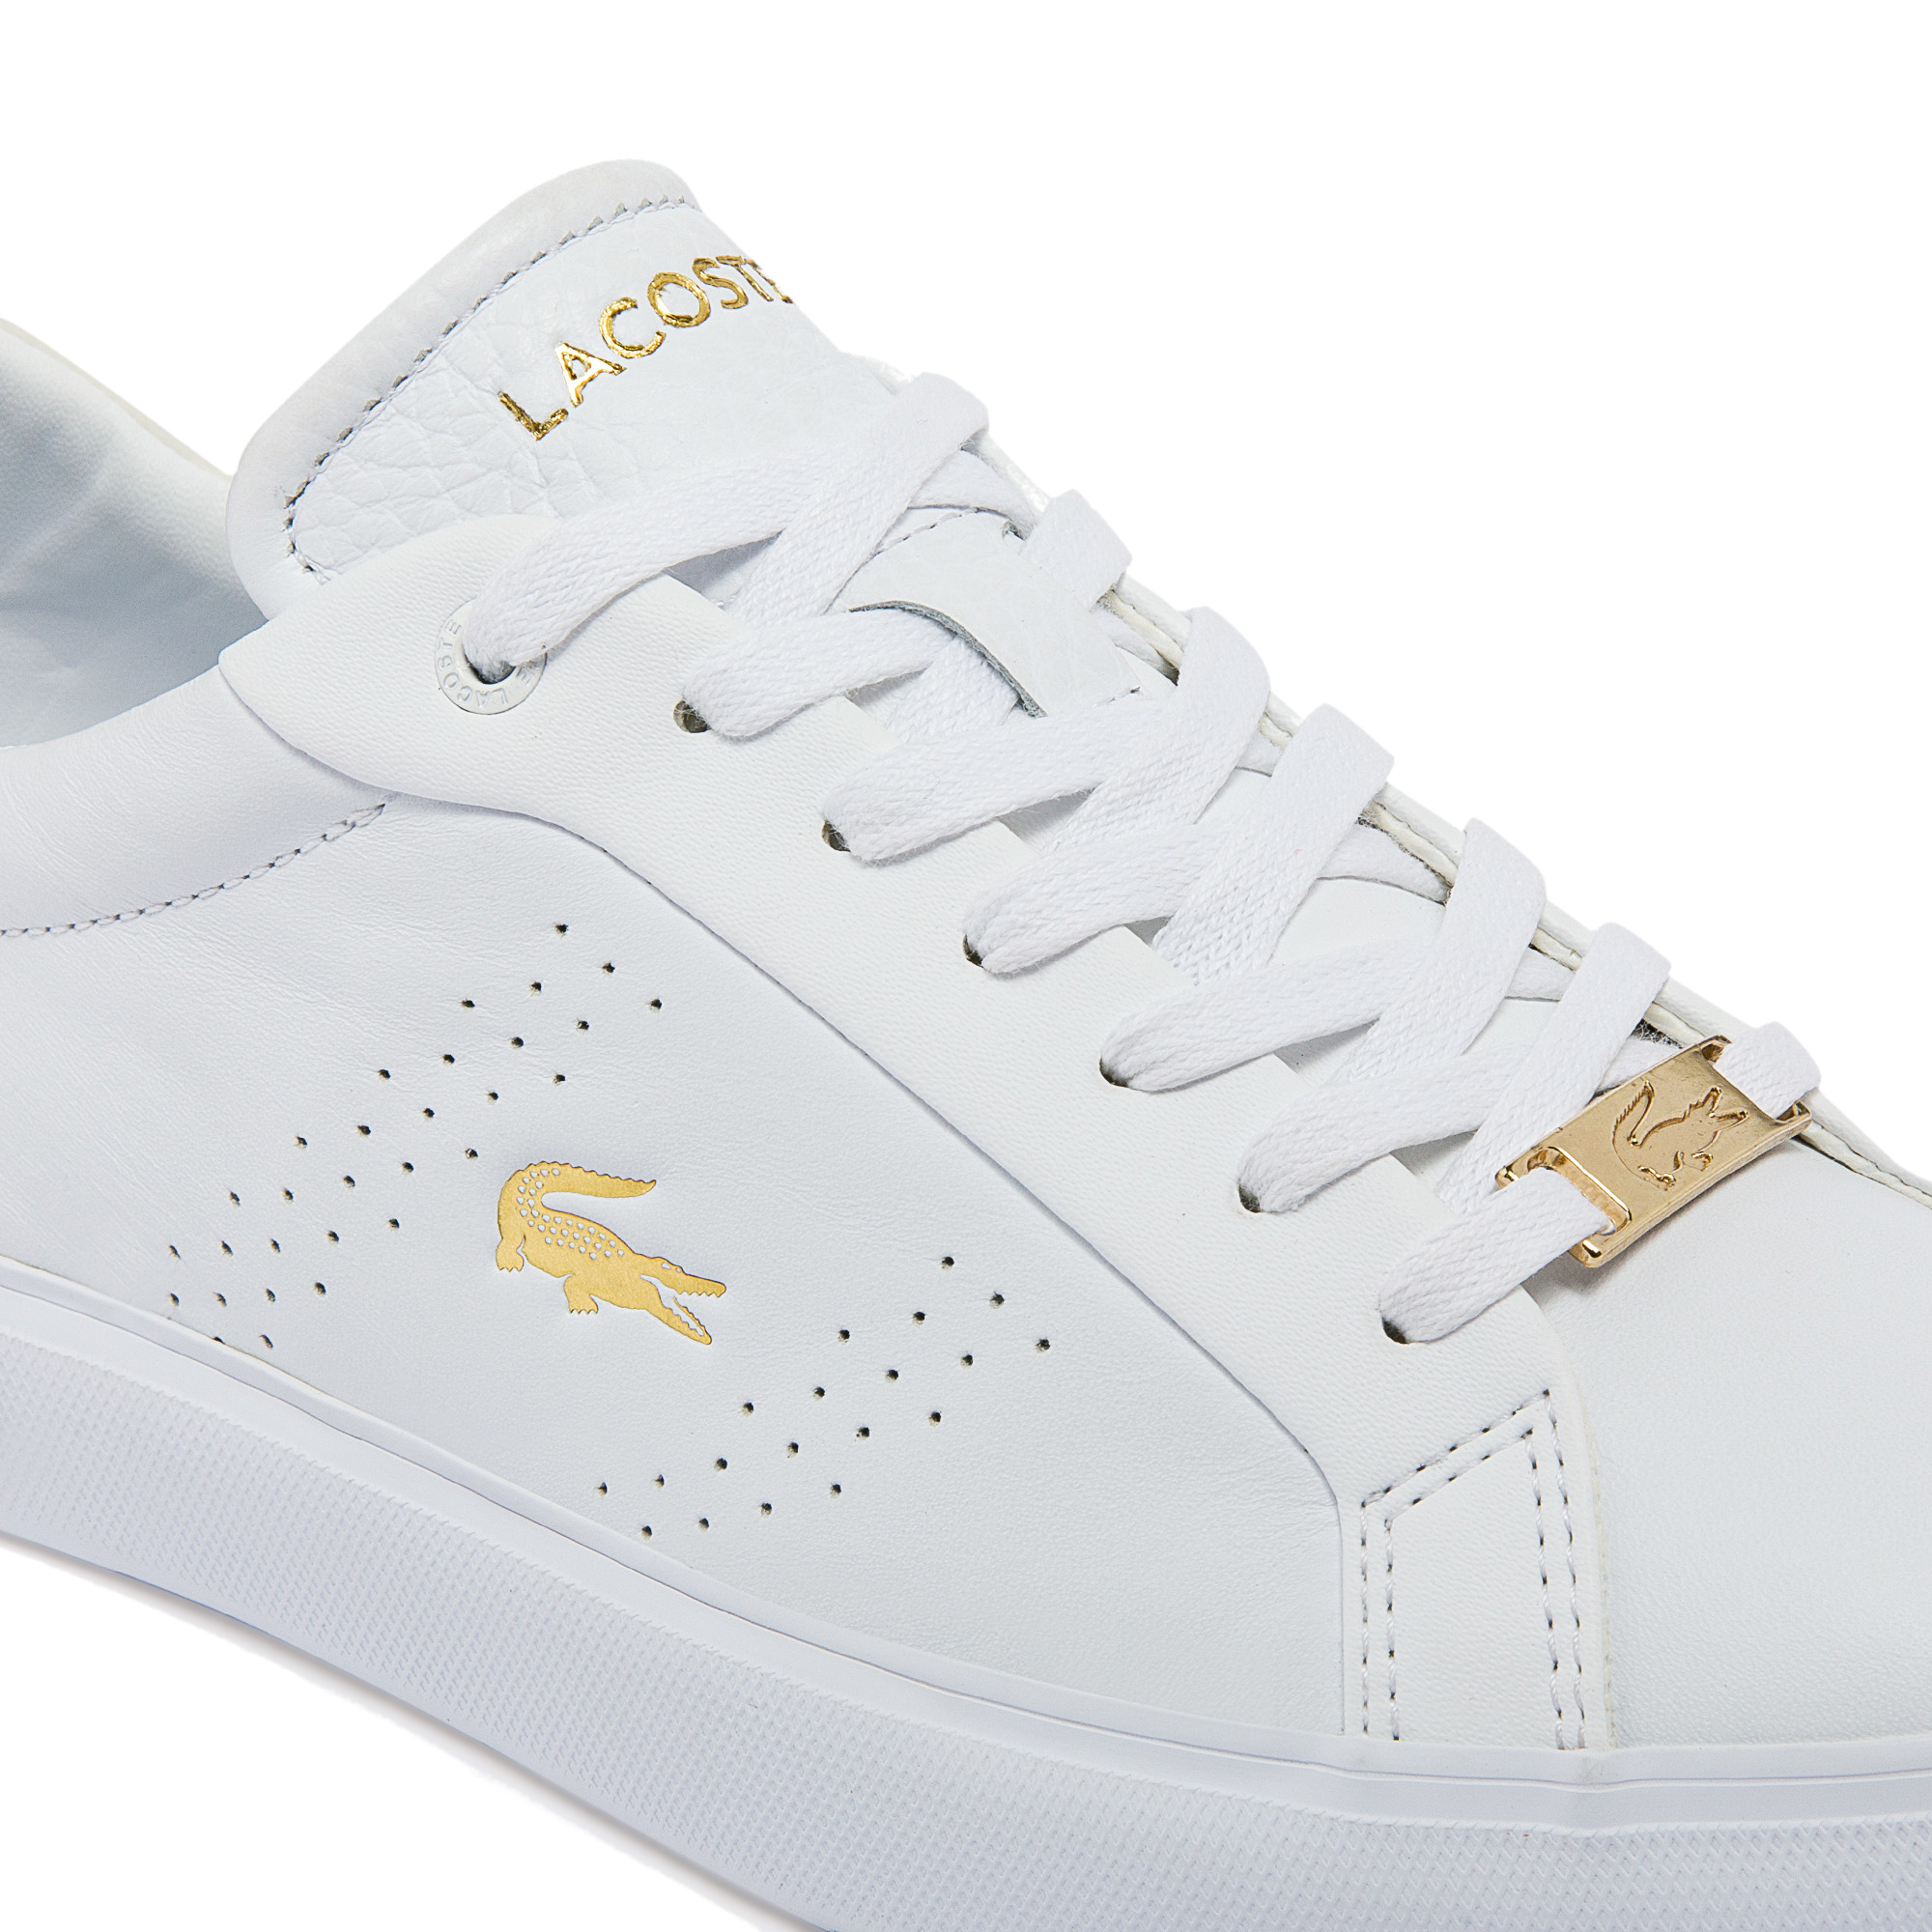 Chaussures Lacoste Powercourt femme